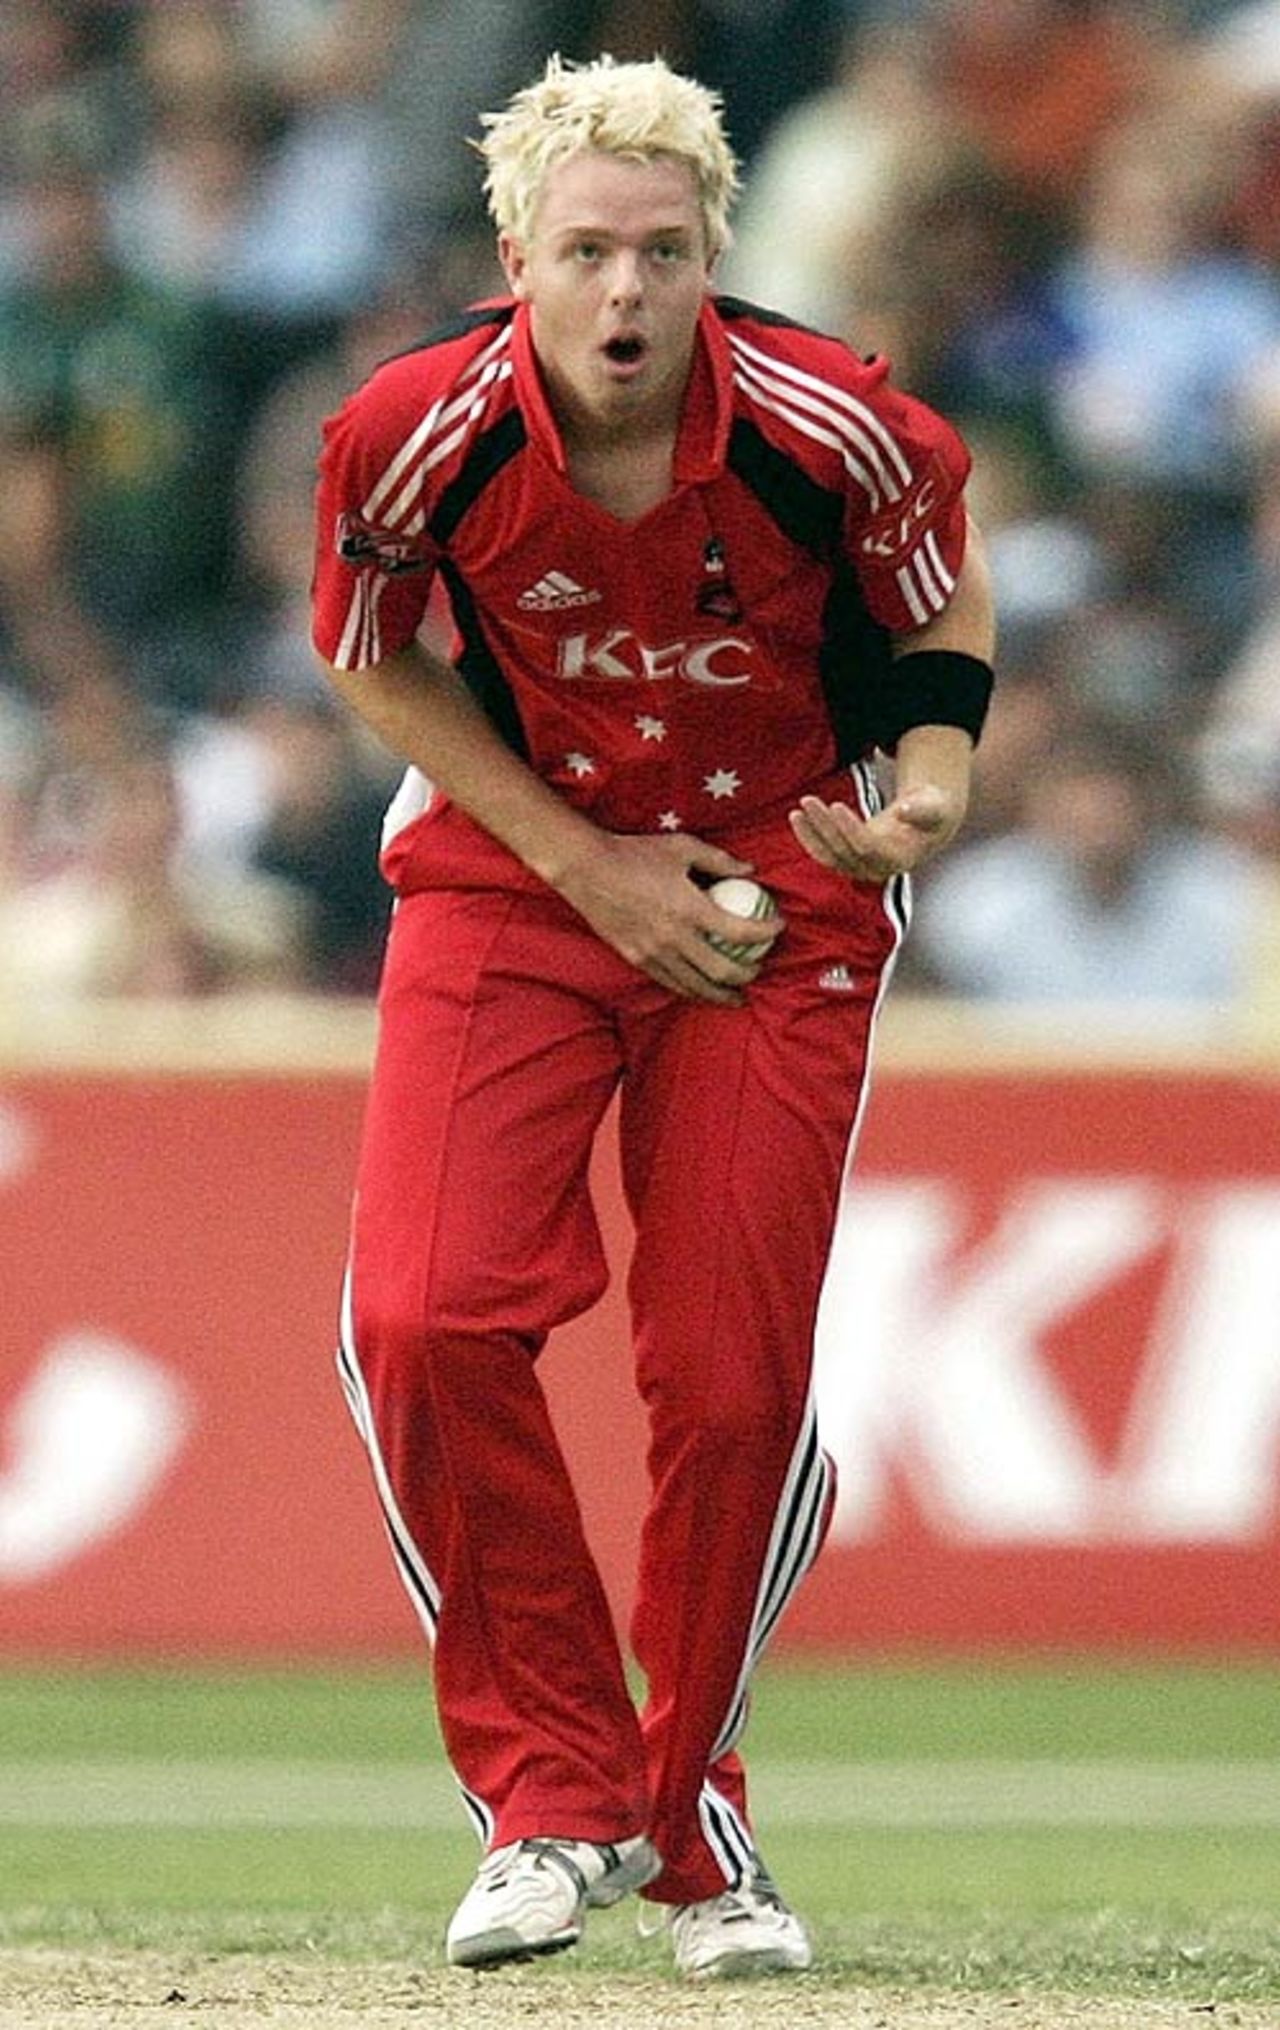 Dan Cullen takes hold of a caught-and-bowled, New South Wales v South Australia, KFC Twenty20, Newcastle, January 7, 2007